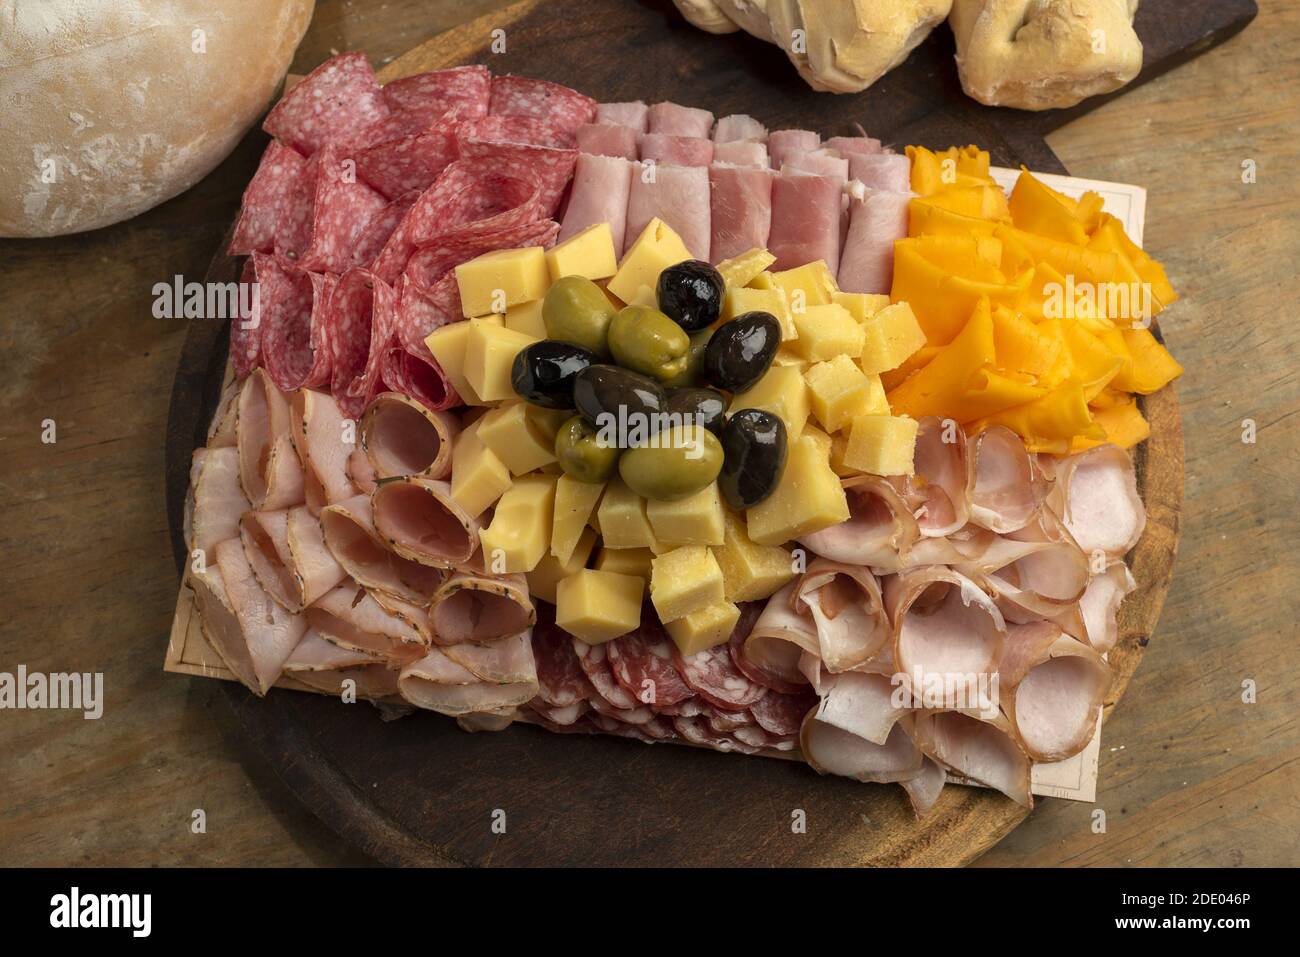 A high angle shot of a gourmet delicious charcuterie board with different meats and cheeses Stock Photo